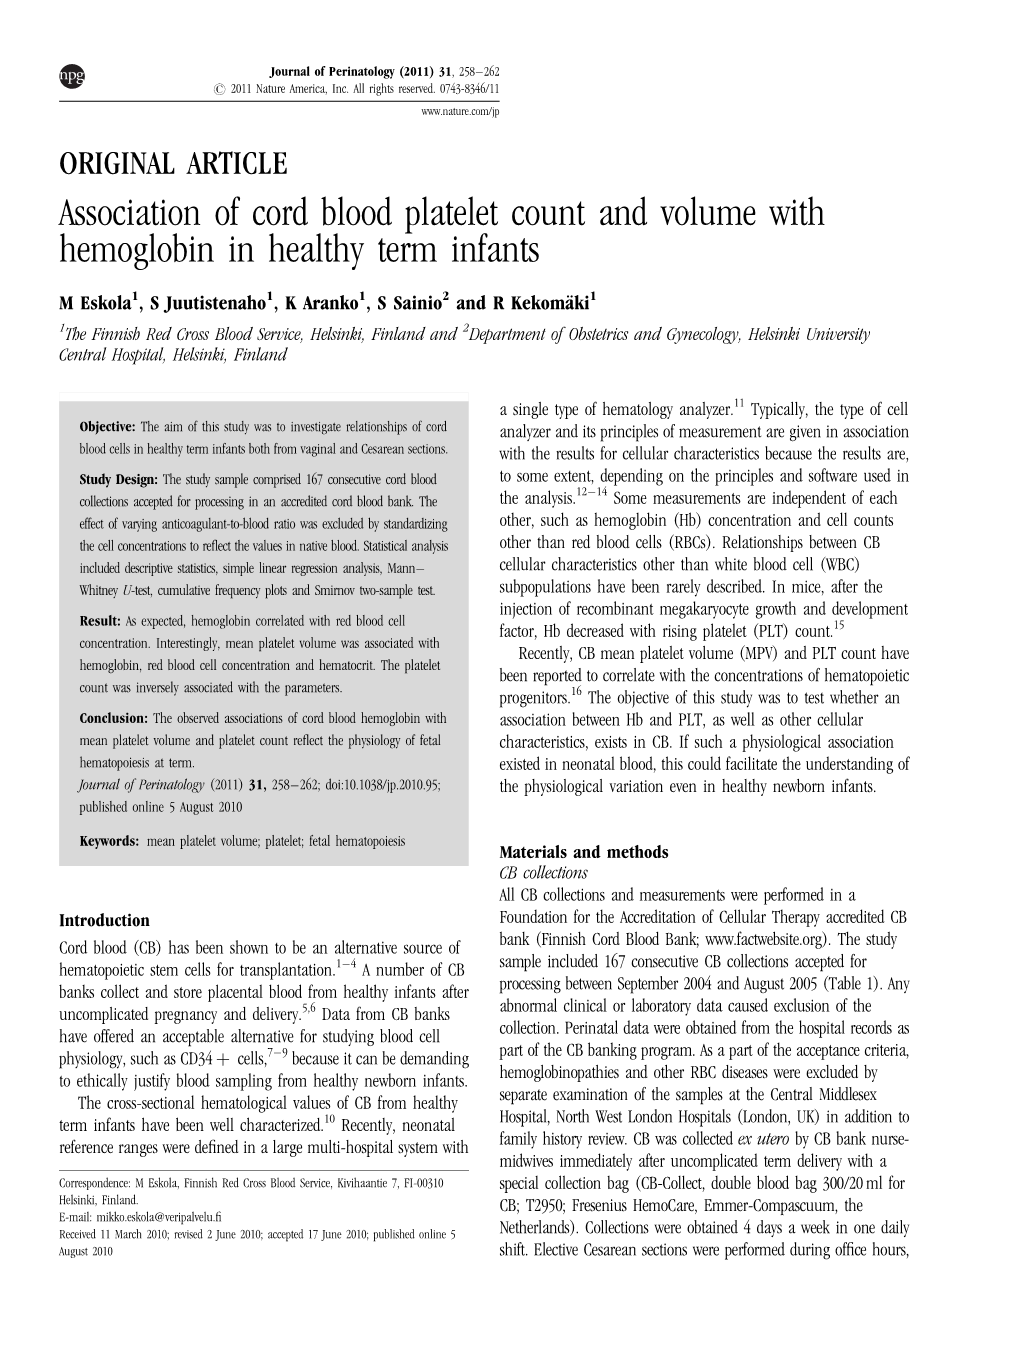 Association of Cord Blood Platelet Count and Volume with Hemoglobin in Healthy Term Infants